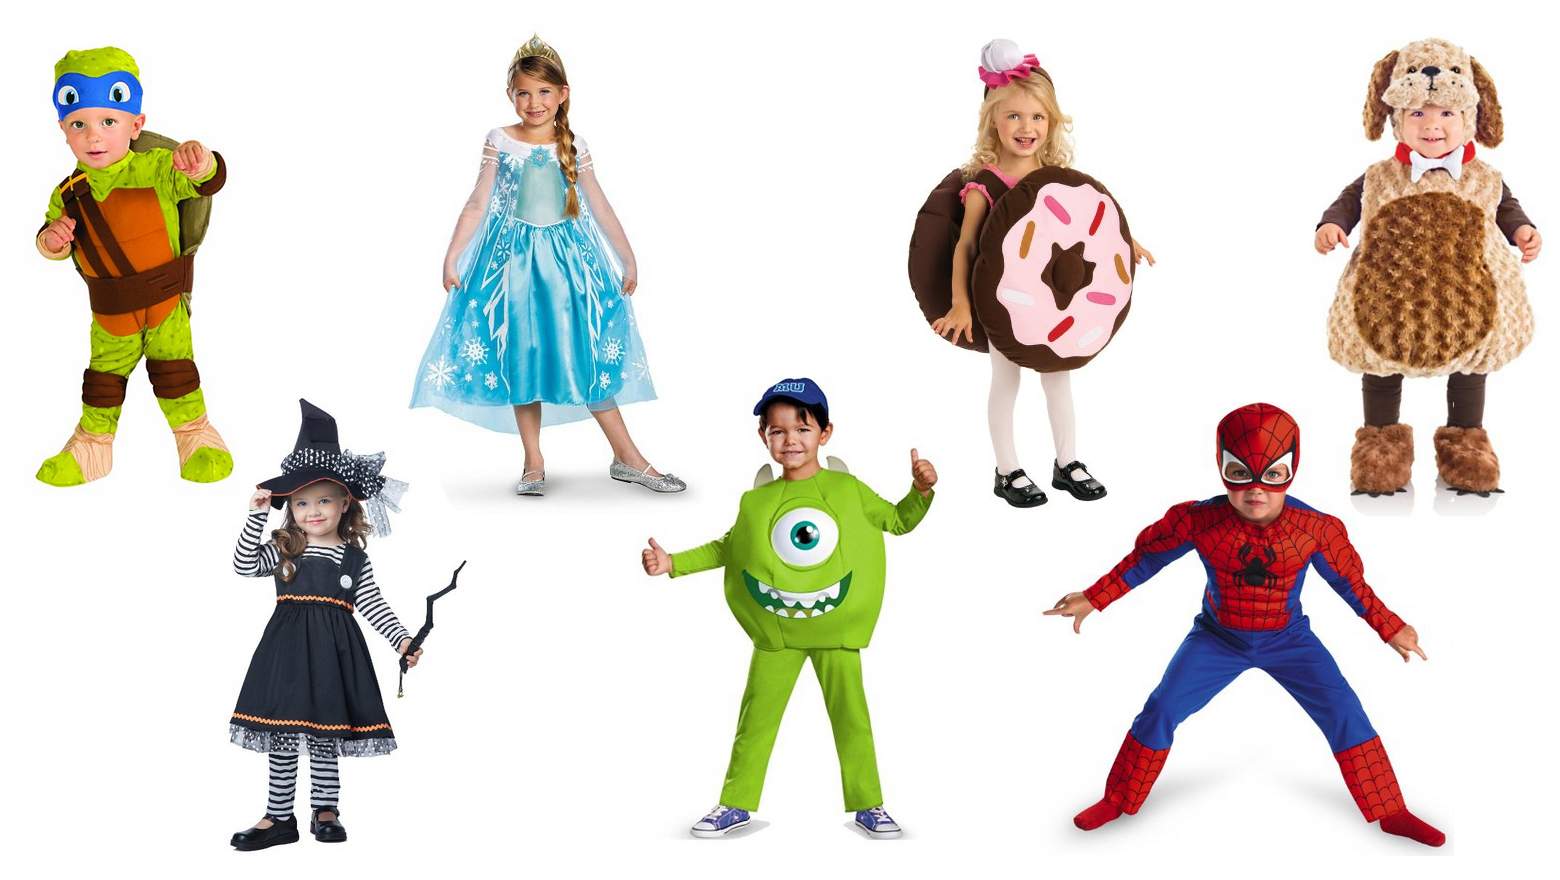 2017 Halloween Costumes for Toddlers